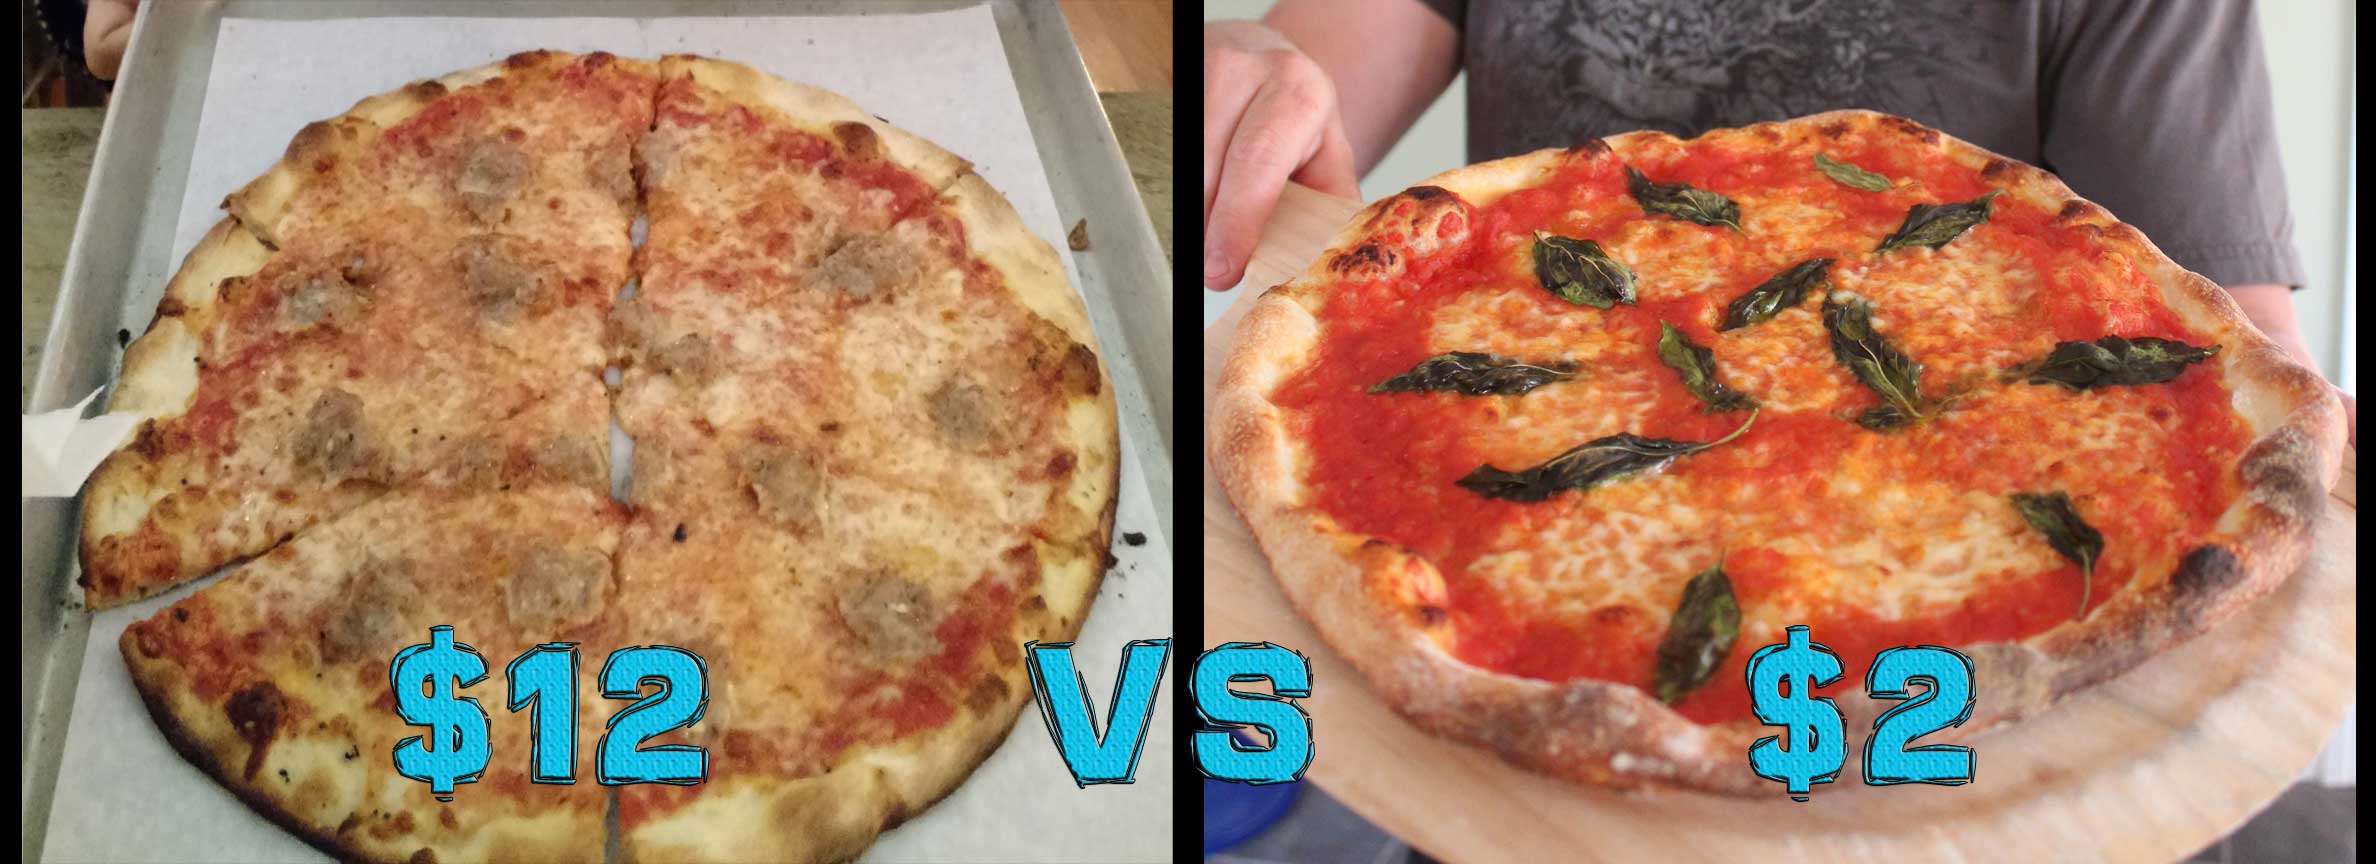 Picture of home vs store made pizza.